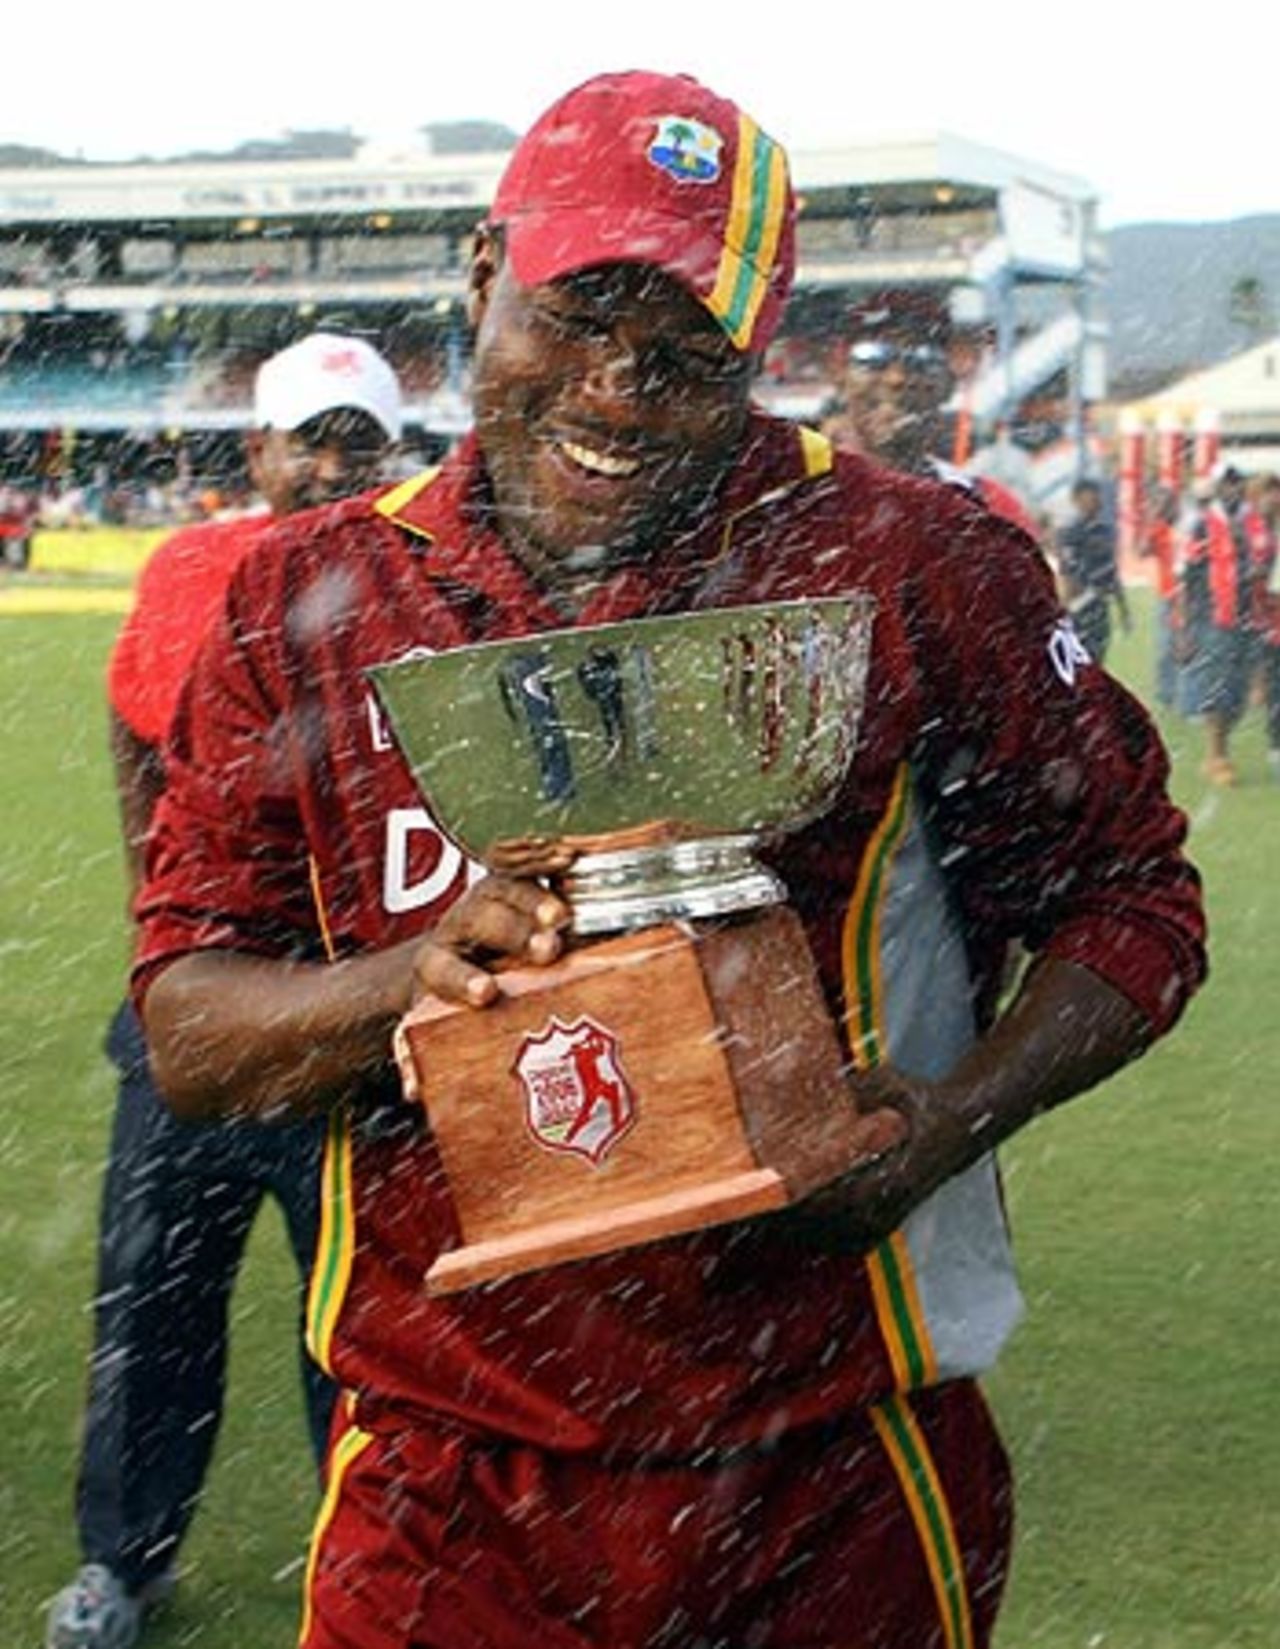 Brian Lara is showered in champagne after the West Indies' series win in Trinidad, West Indies v India, 5th ODI, Trinidad, May 28, 2006